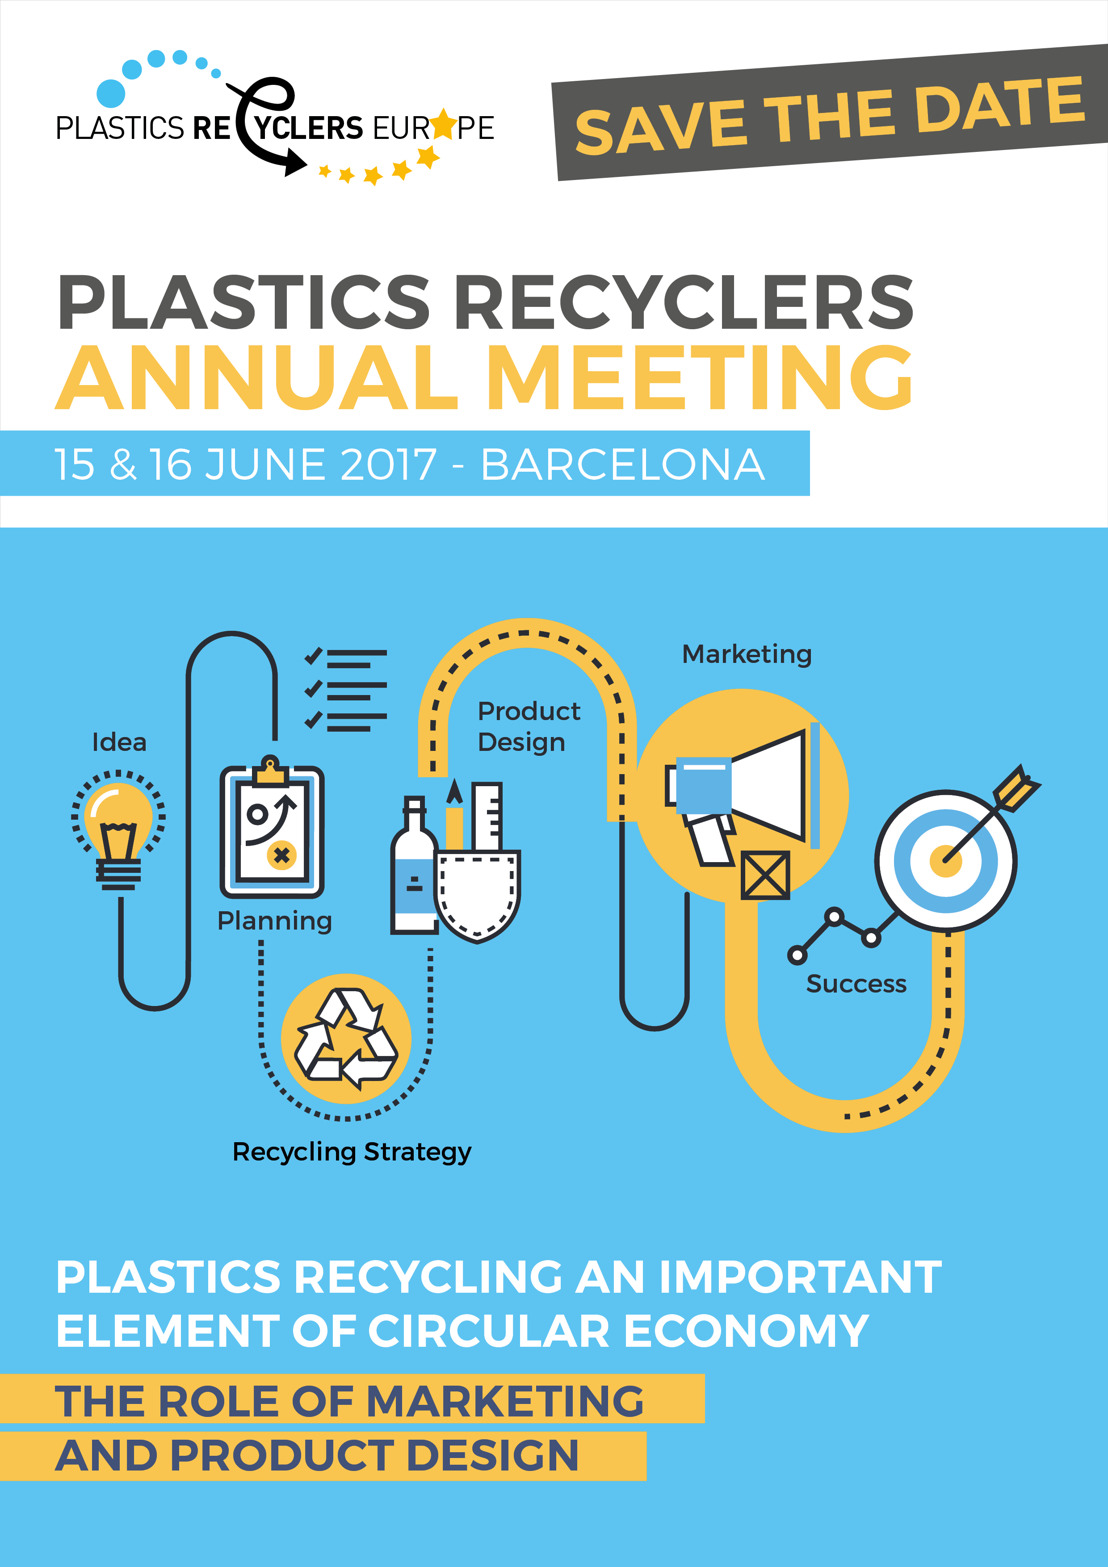 Save the Date! Plastics Recyclers Annual Meeting 2017